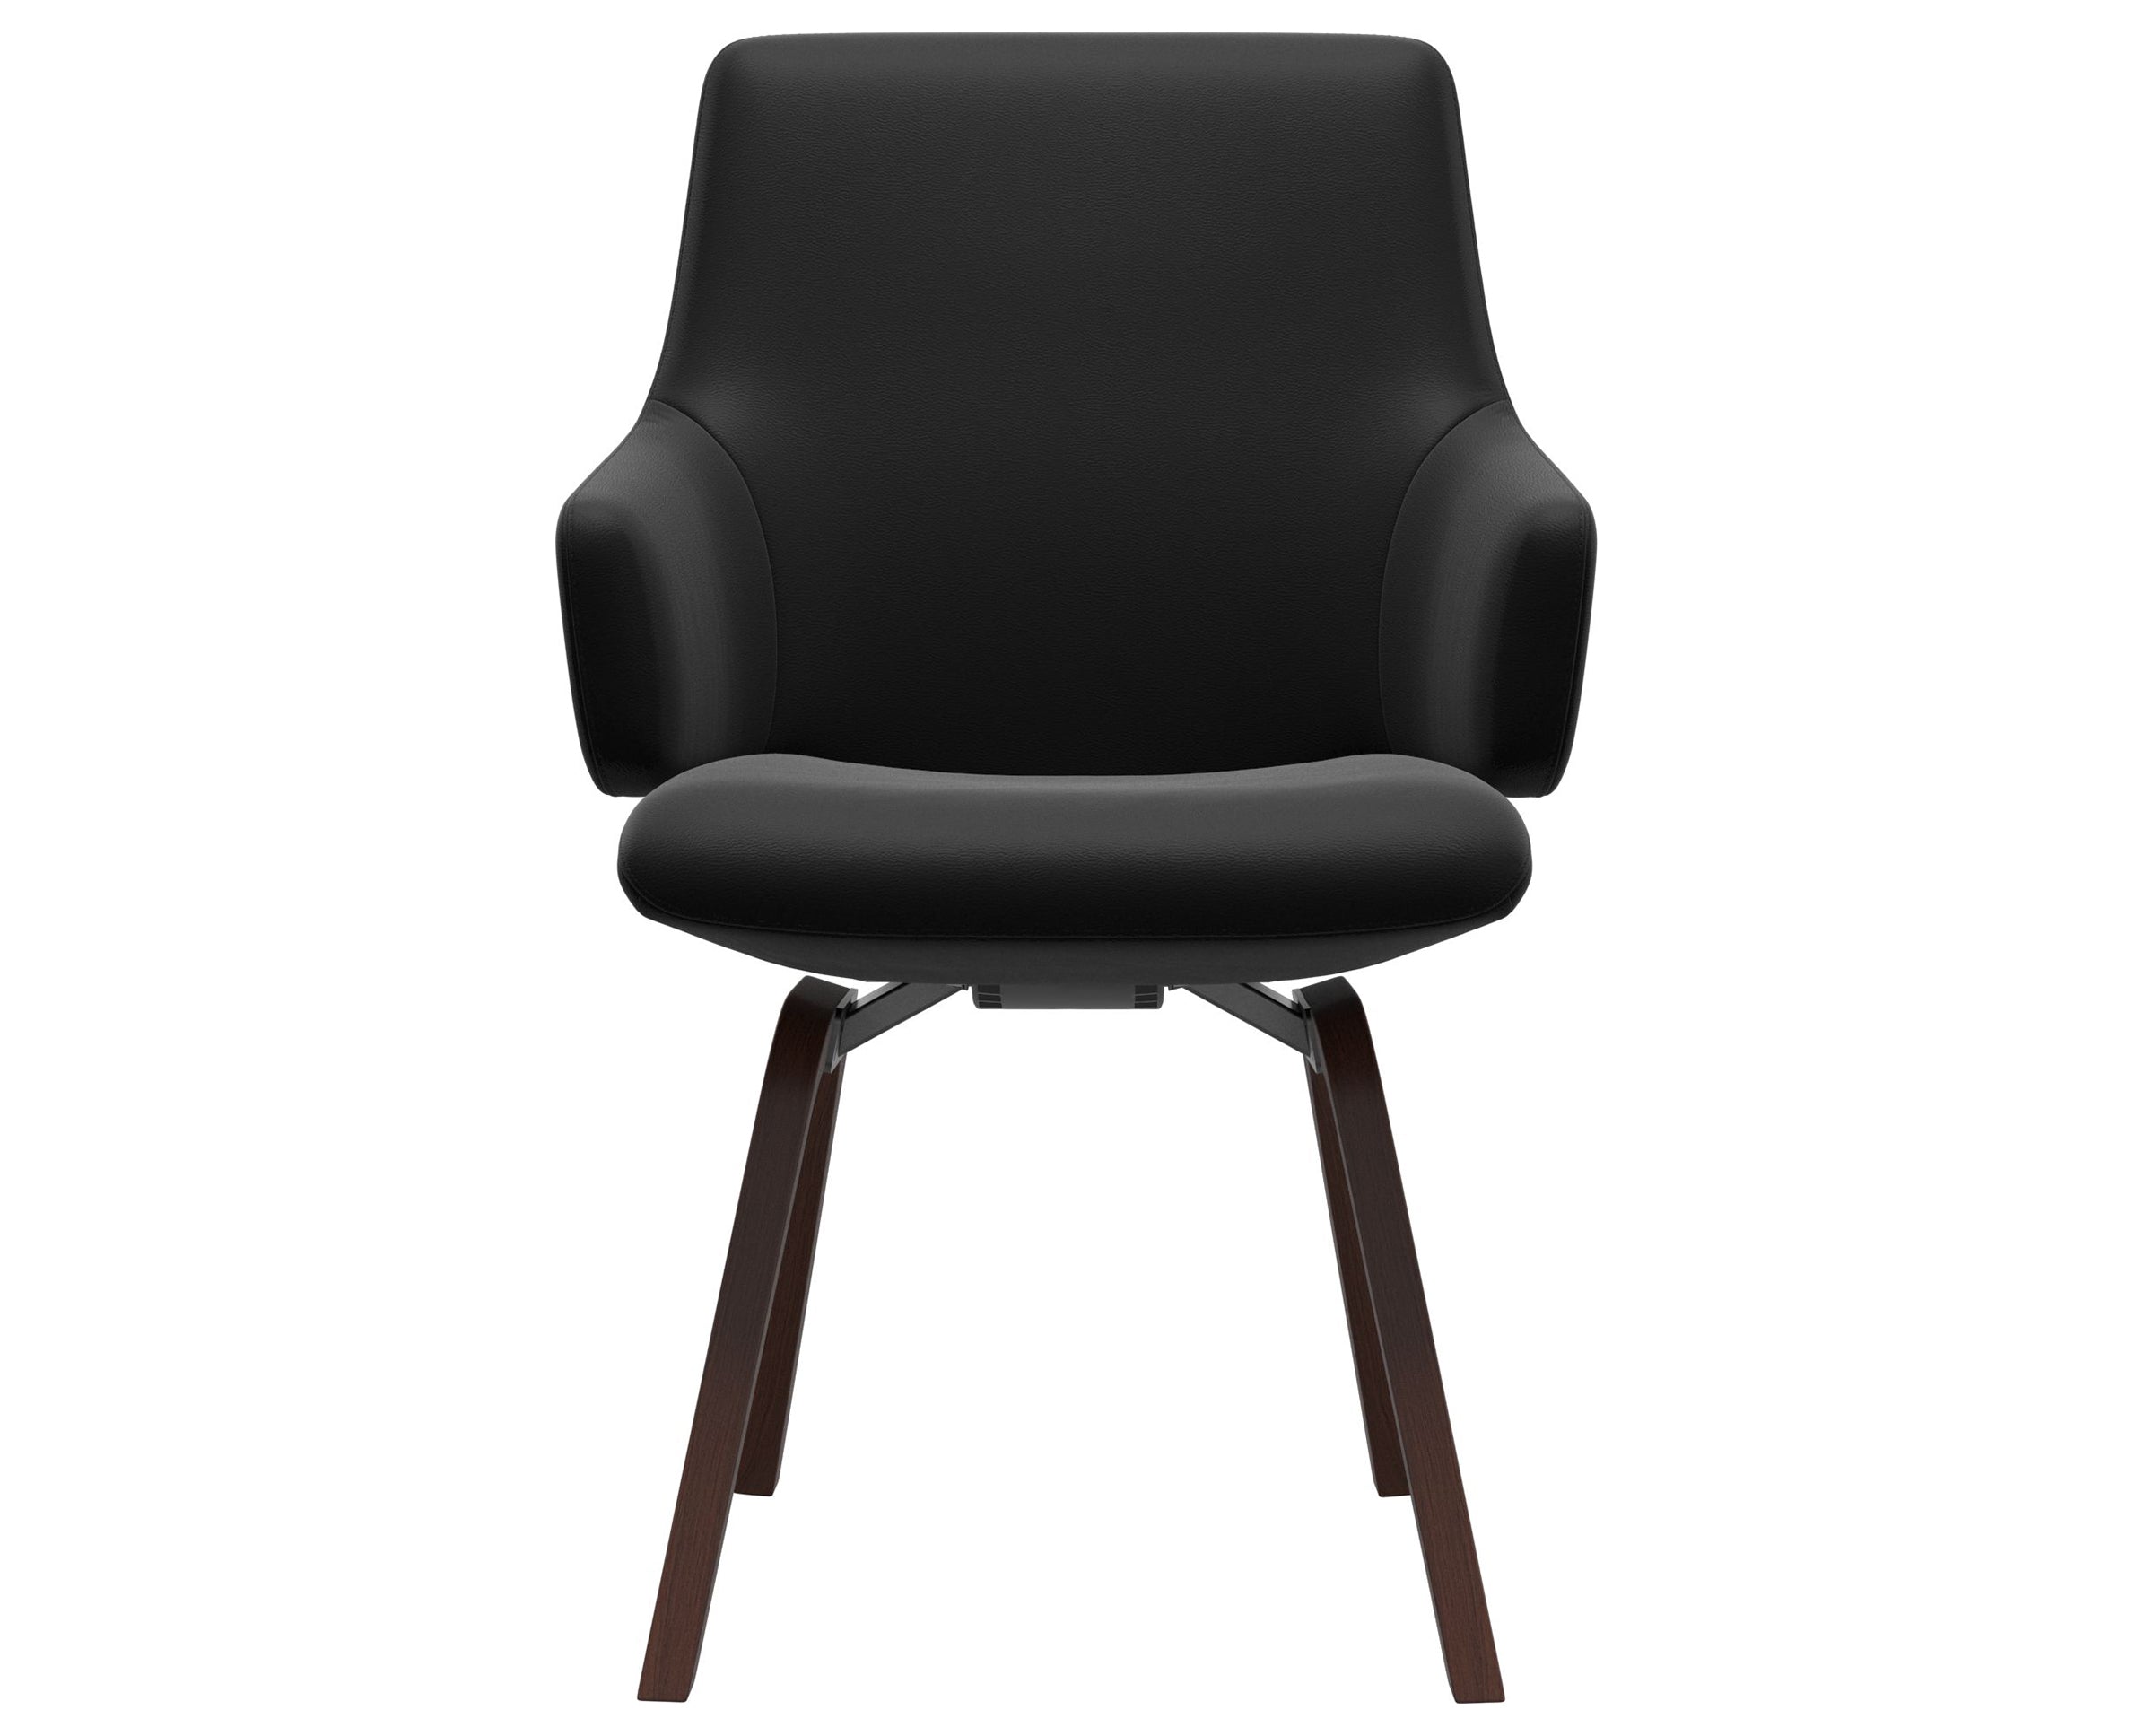 Paloma Leather Black and Walnut Base | Stressless Laurel Low Back D200 Dining Chair w/Arms | Valley Ridge Furniture